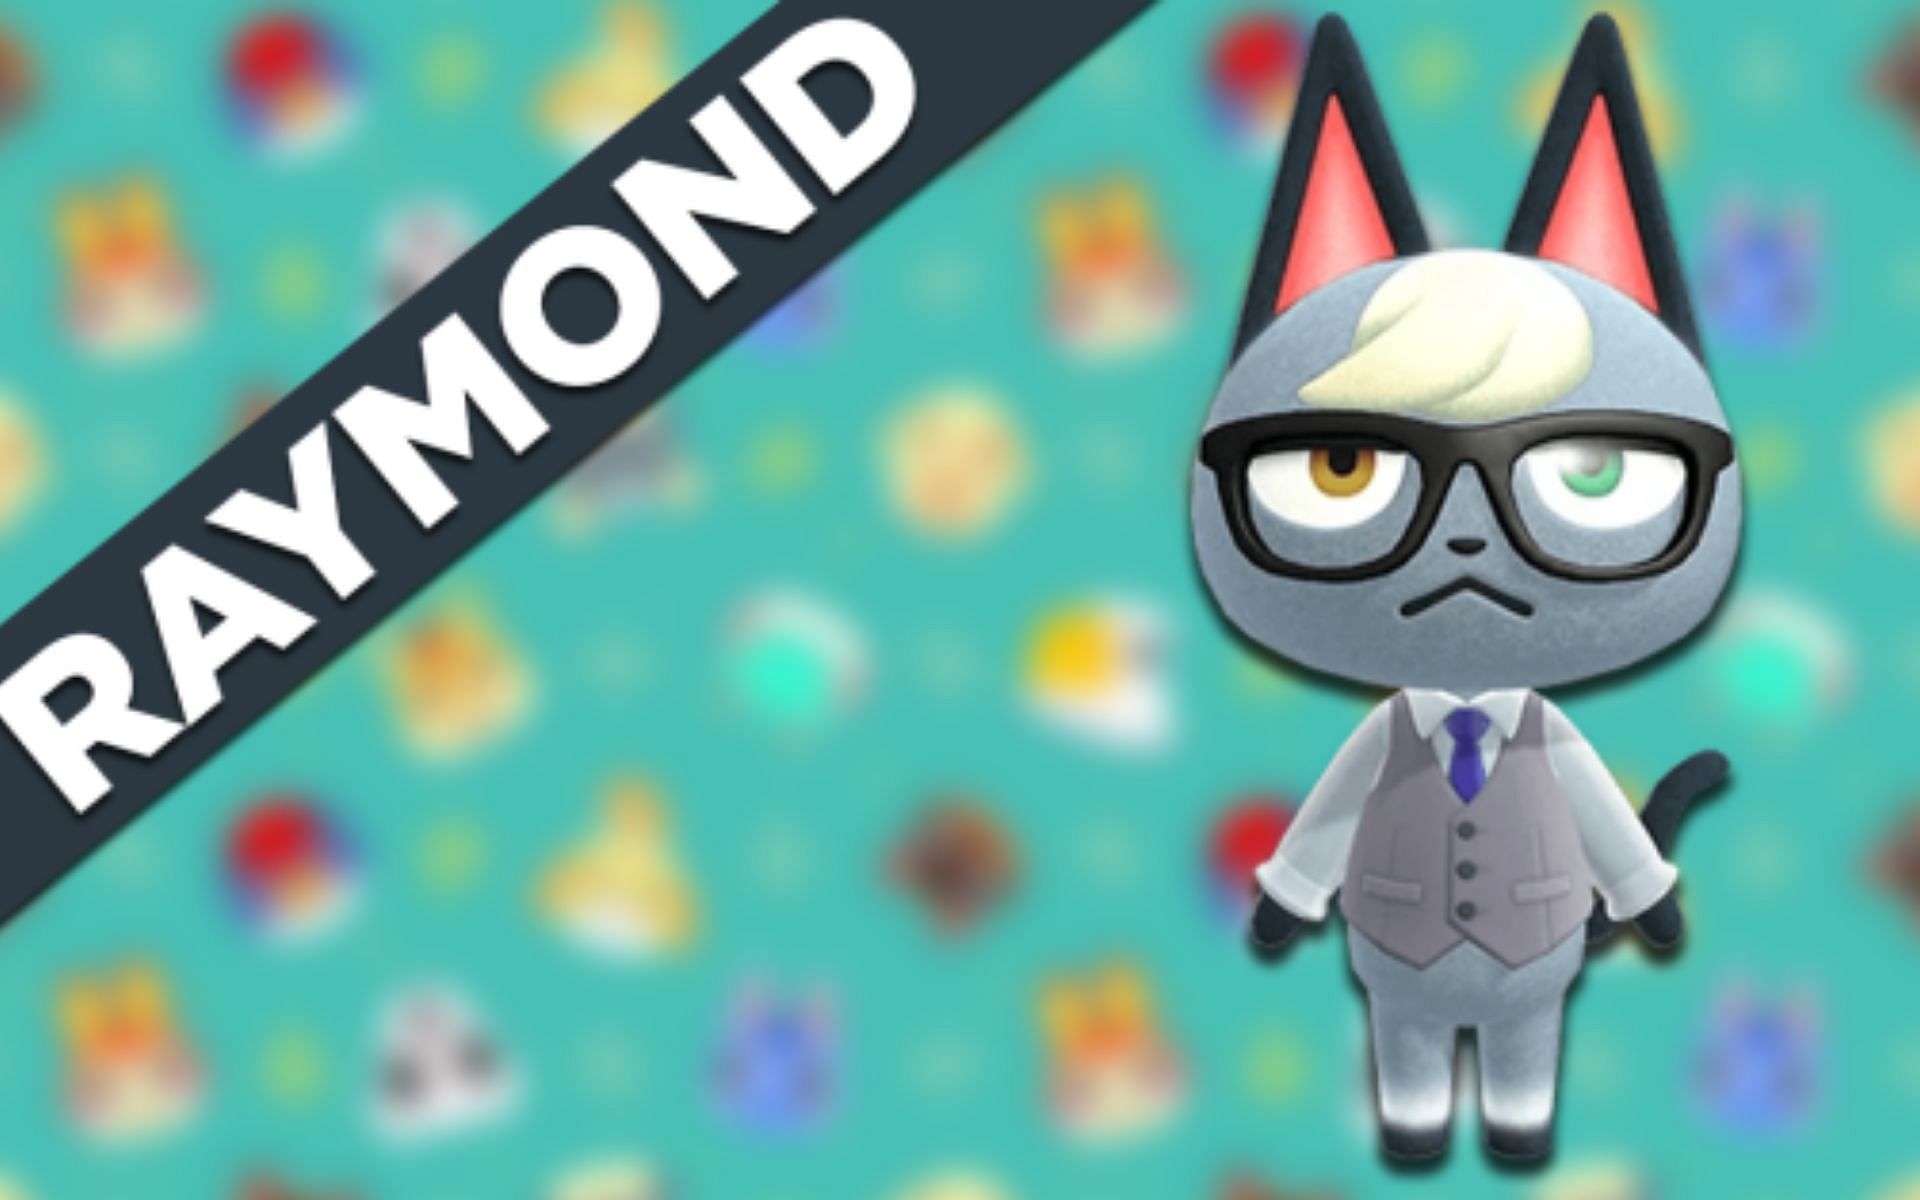 Why is Raymond so popular in Animal Crossing New Horizons?